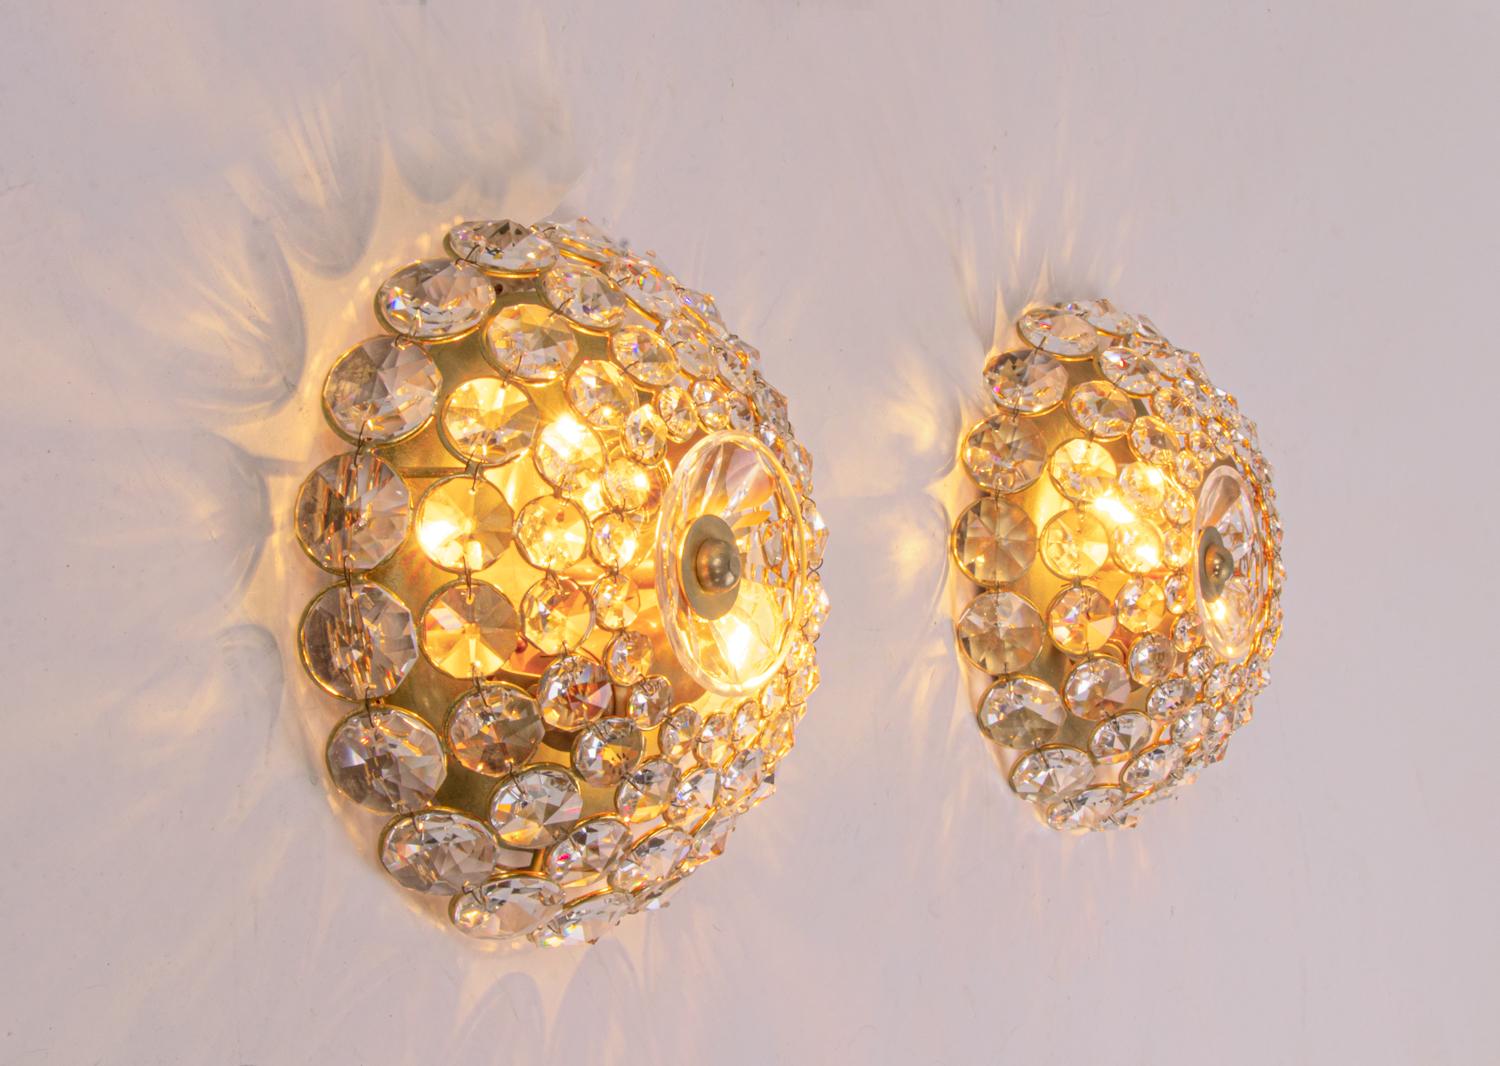 Mid-20th Century Pair of Gold-Plated Brass and Crystal Glass Wall Lamps Sconces by Palwa, 1960 For Sale